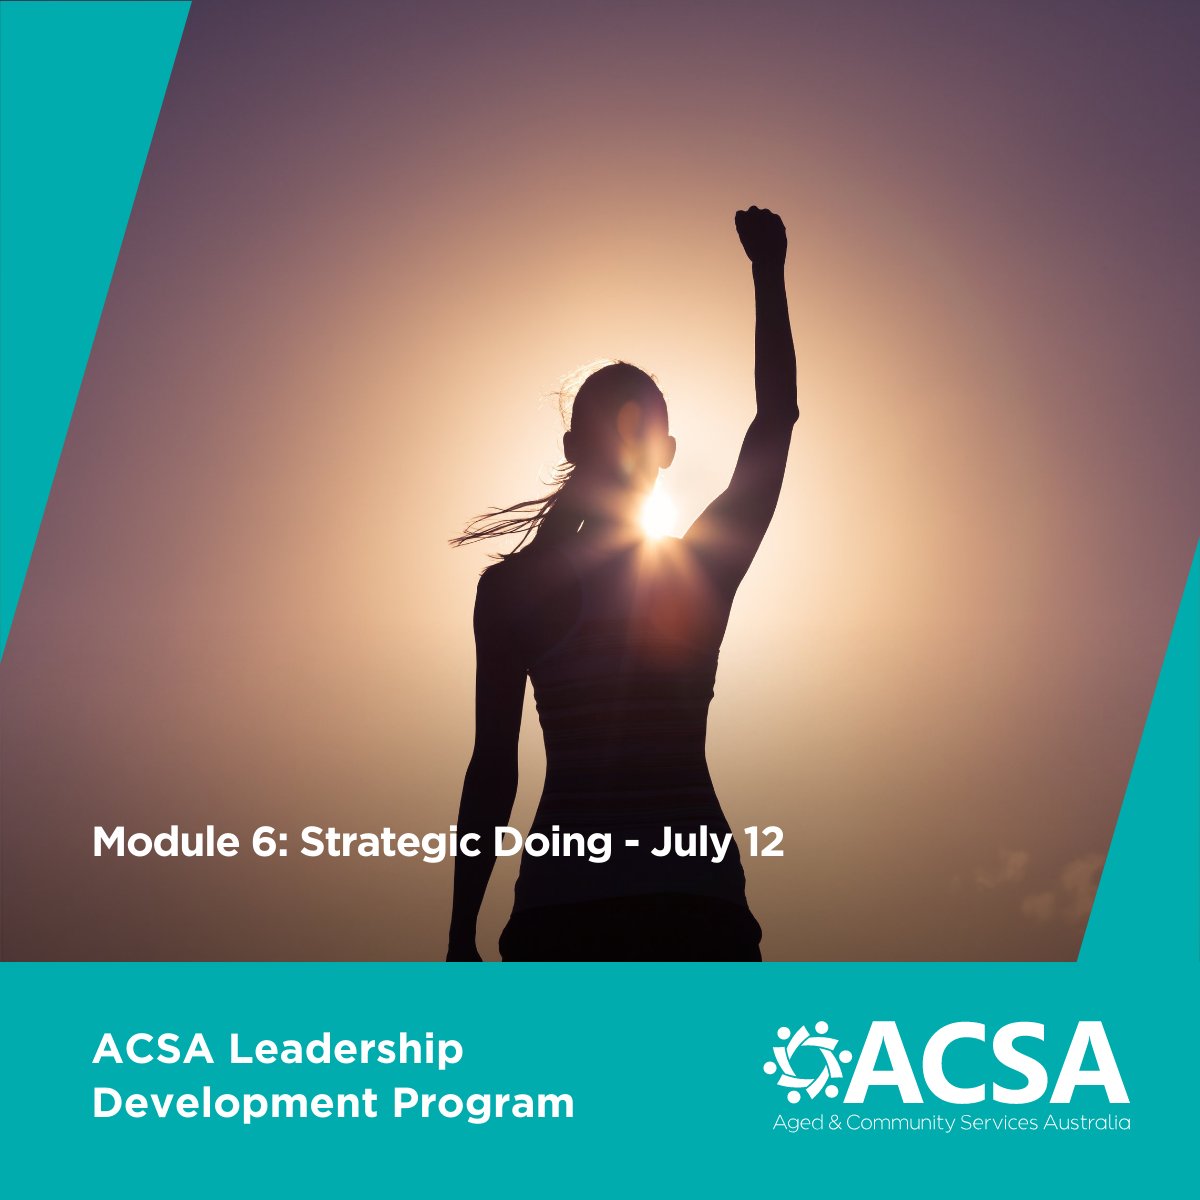 Join us for Module 6 of ACSA’s Leadership Development Program on July 12. Learn how to create sustainable achievement habits and rituals, break the analysis paralysis cycle and fosters a positive ‘Day One ‘mindset. > ow.ly/FOne50JB8Vi #ACSALeadership #agedcare #ACSAKnowHow